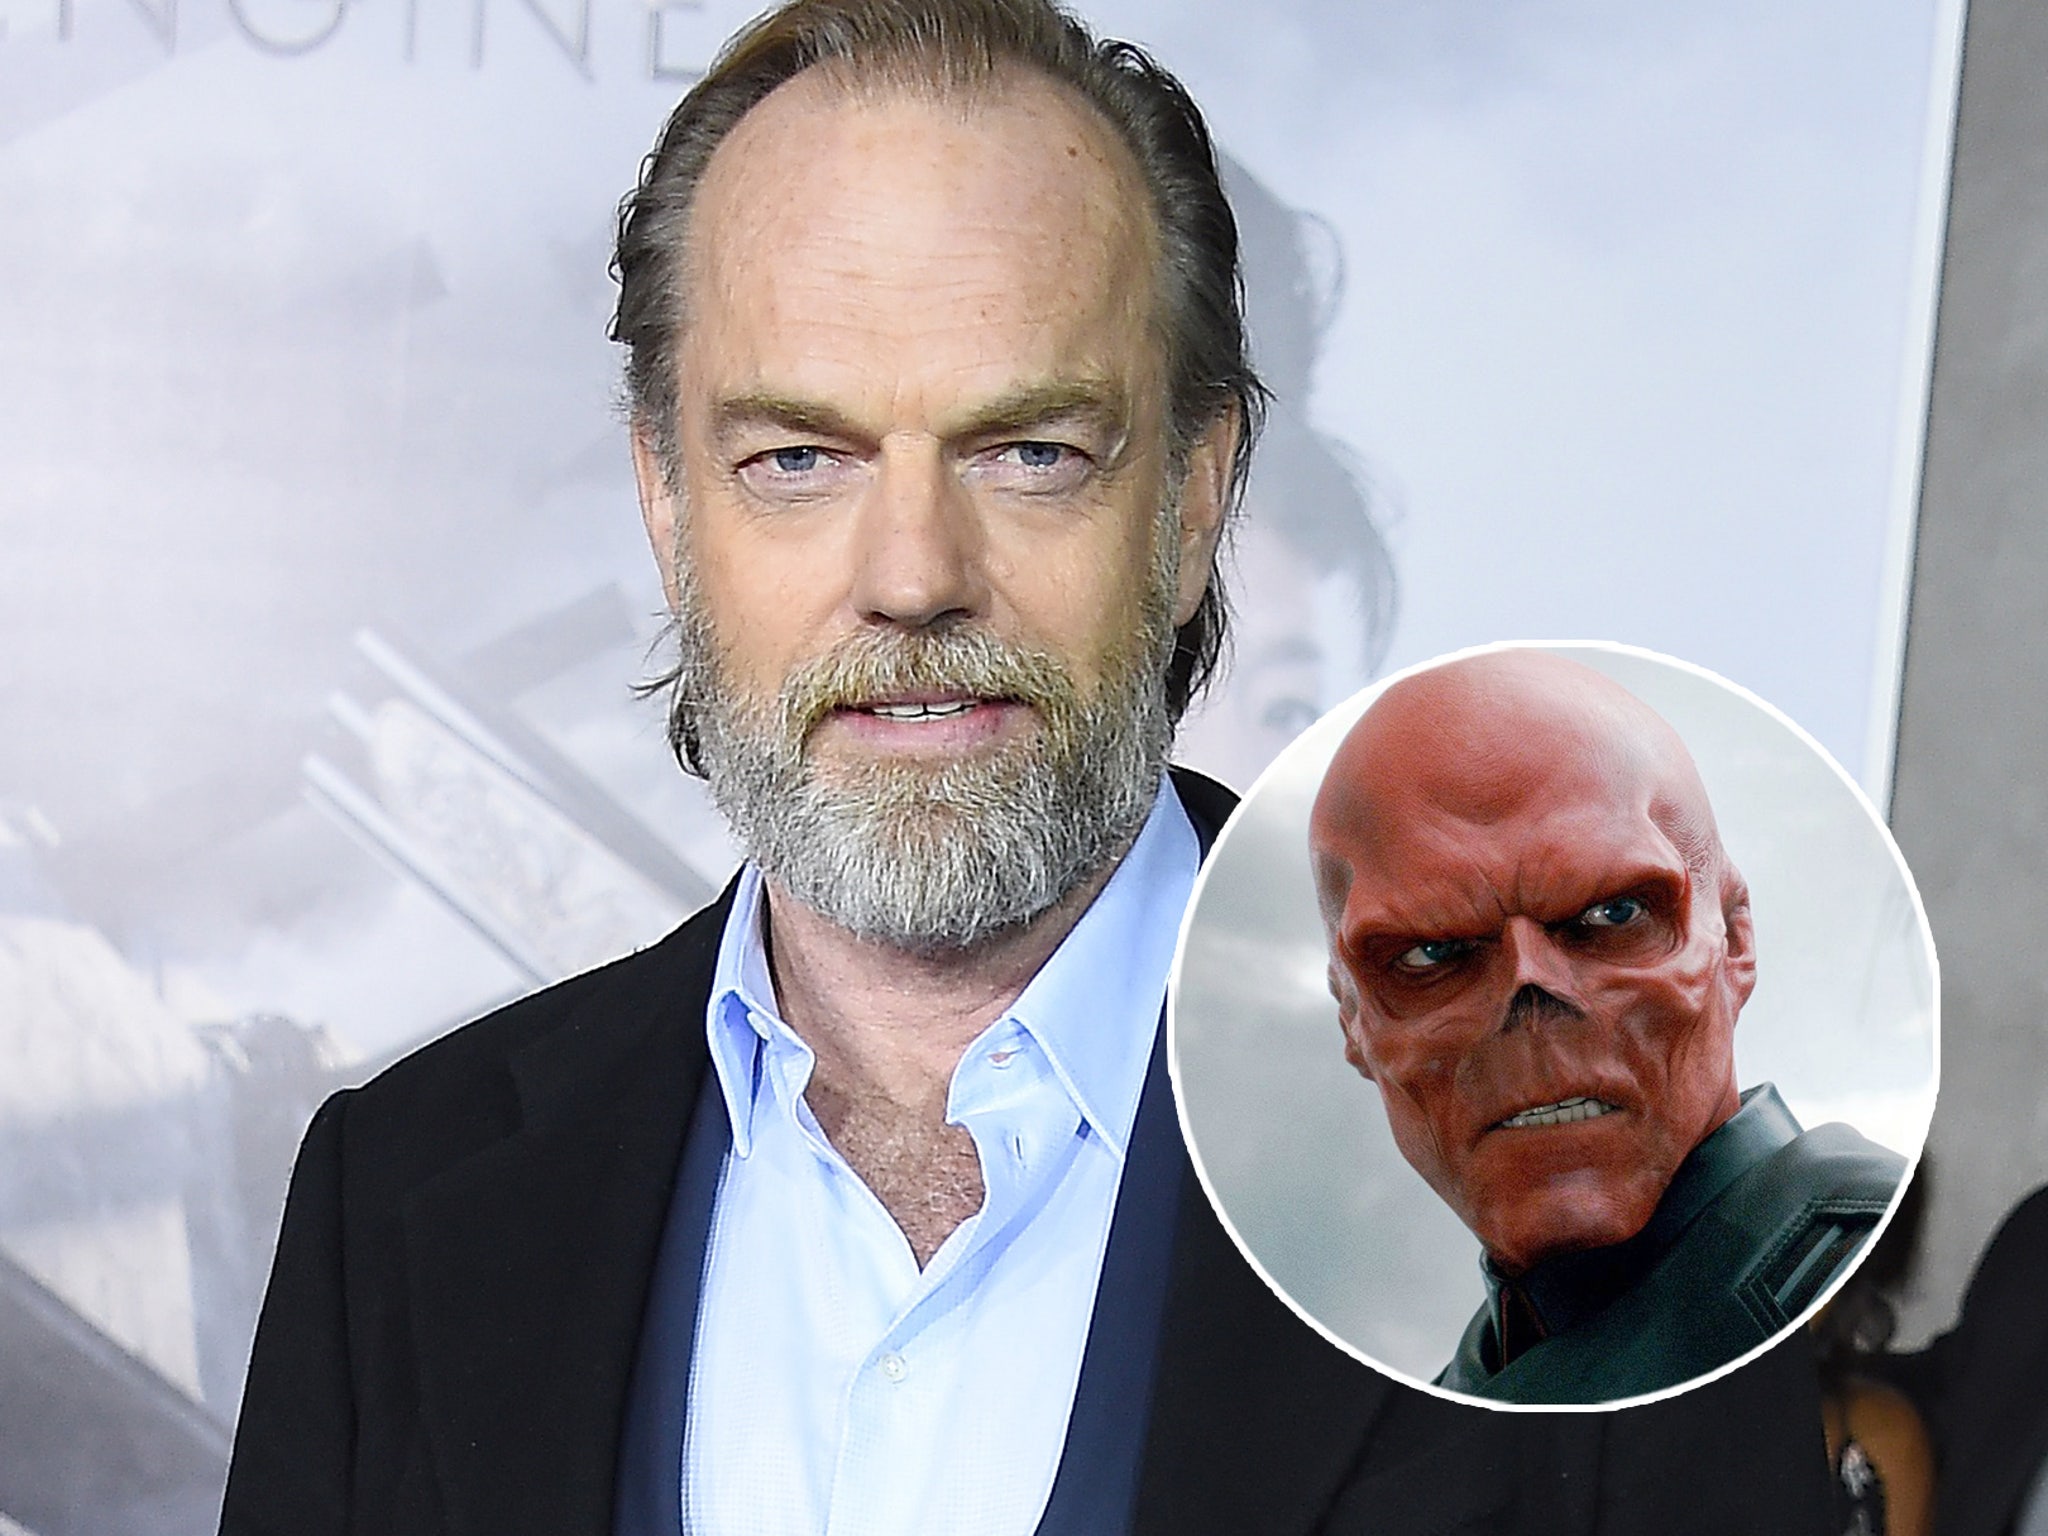 Hugo Weaving calls his 'Transformers' role 'meaningless,' not keen on  returning as the Red Skull for 'Captain America' sequel